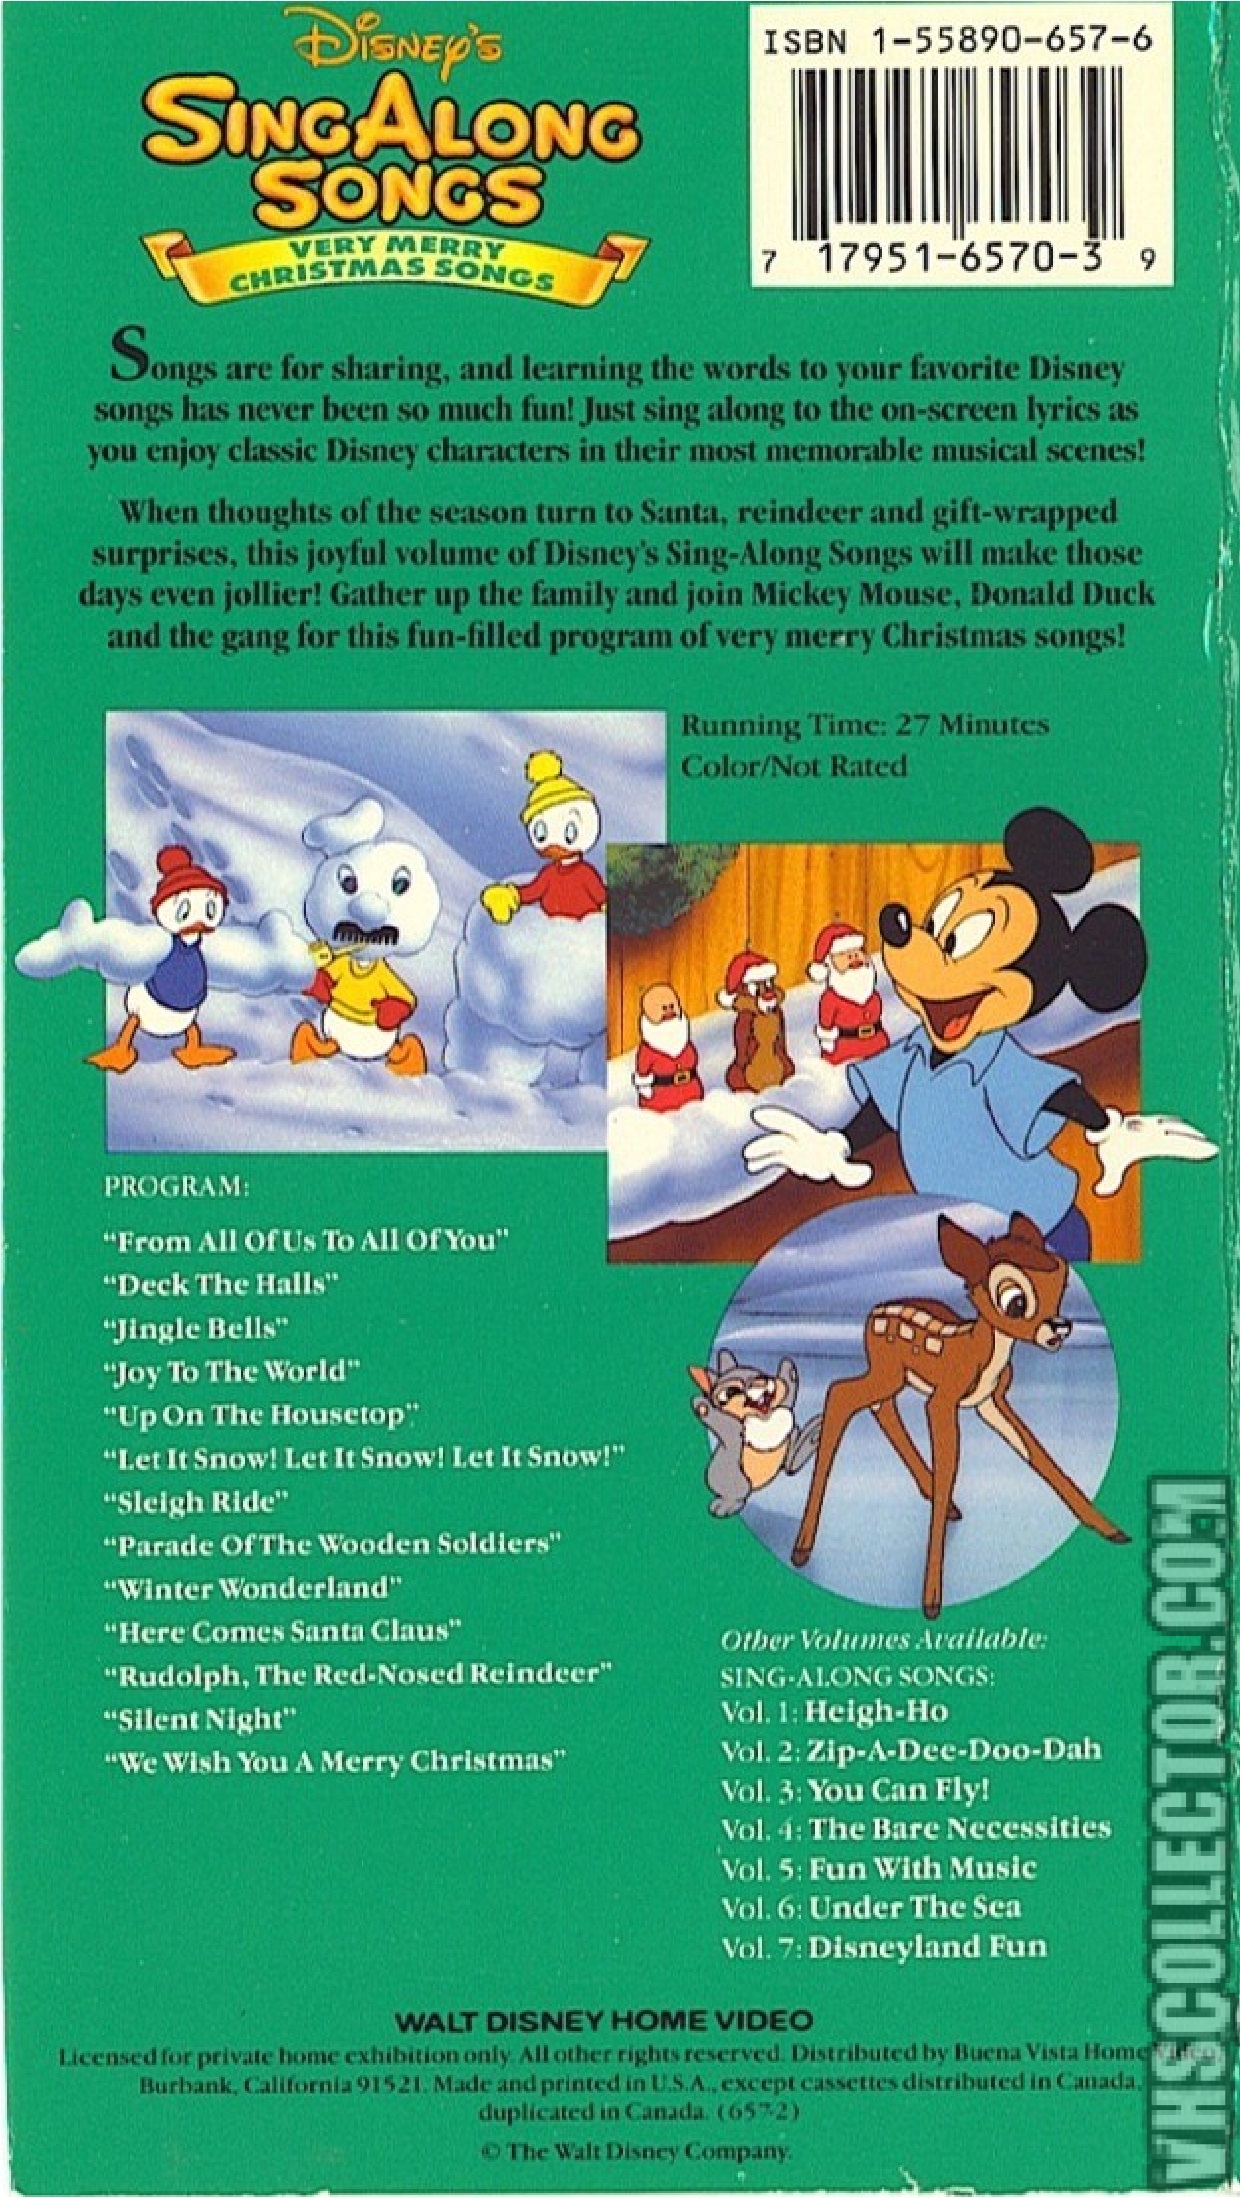 Disneys Sing Along Songs Very Merry Christmas New Vhs Etsy | Images and ...